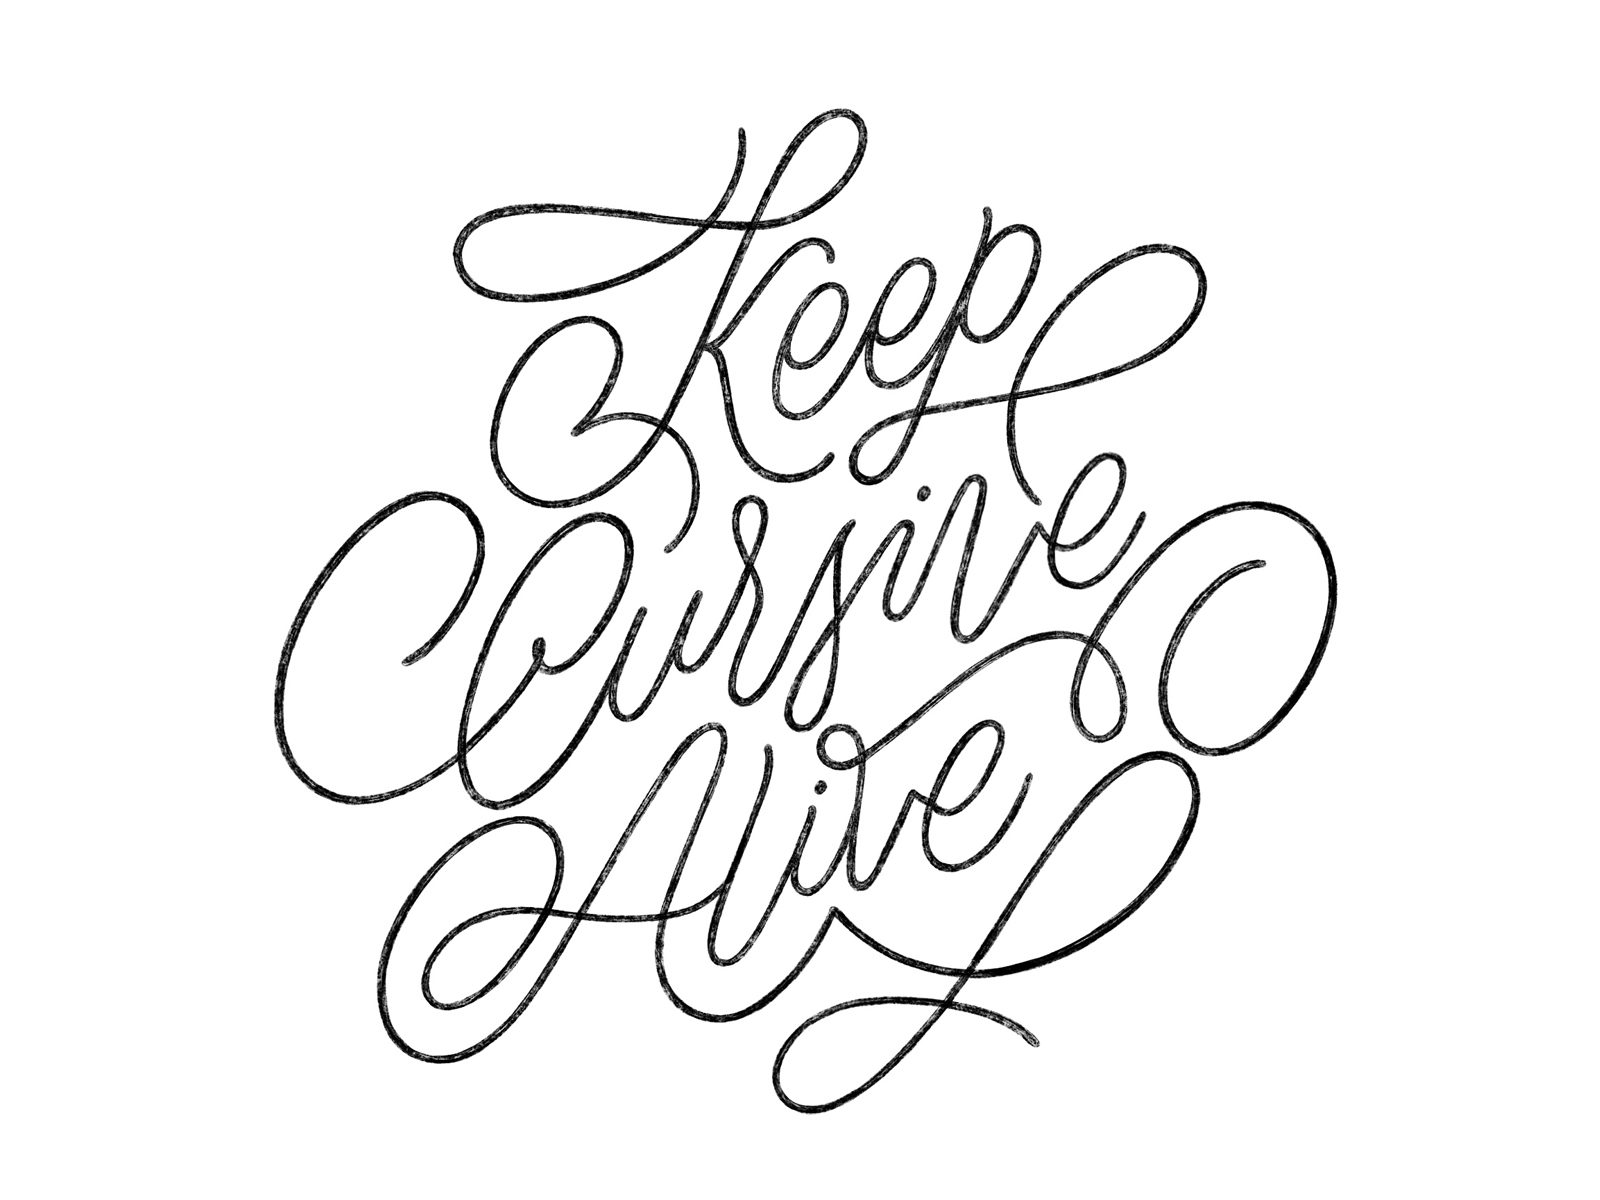 Keep Cursive Alice by Kate Pullen on Dribbble